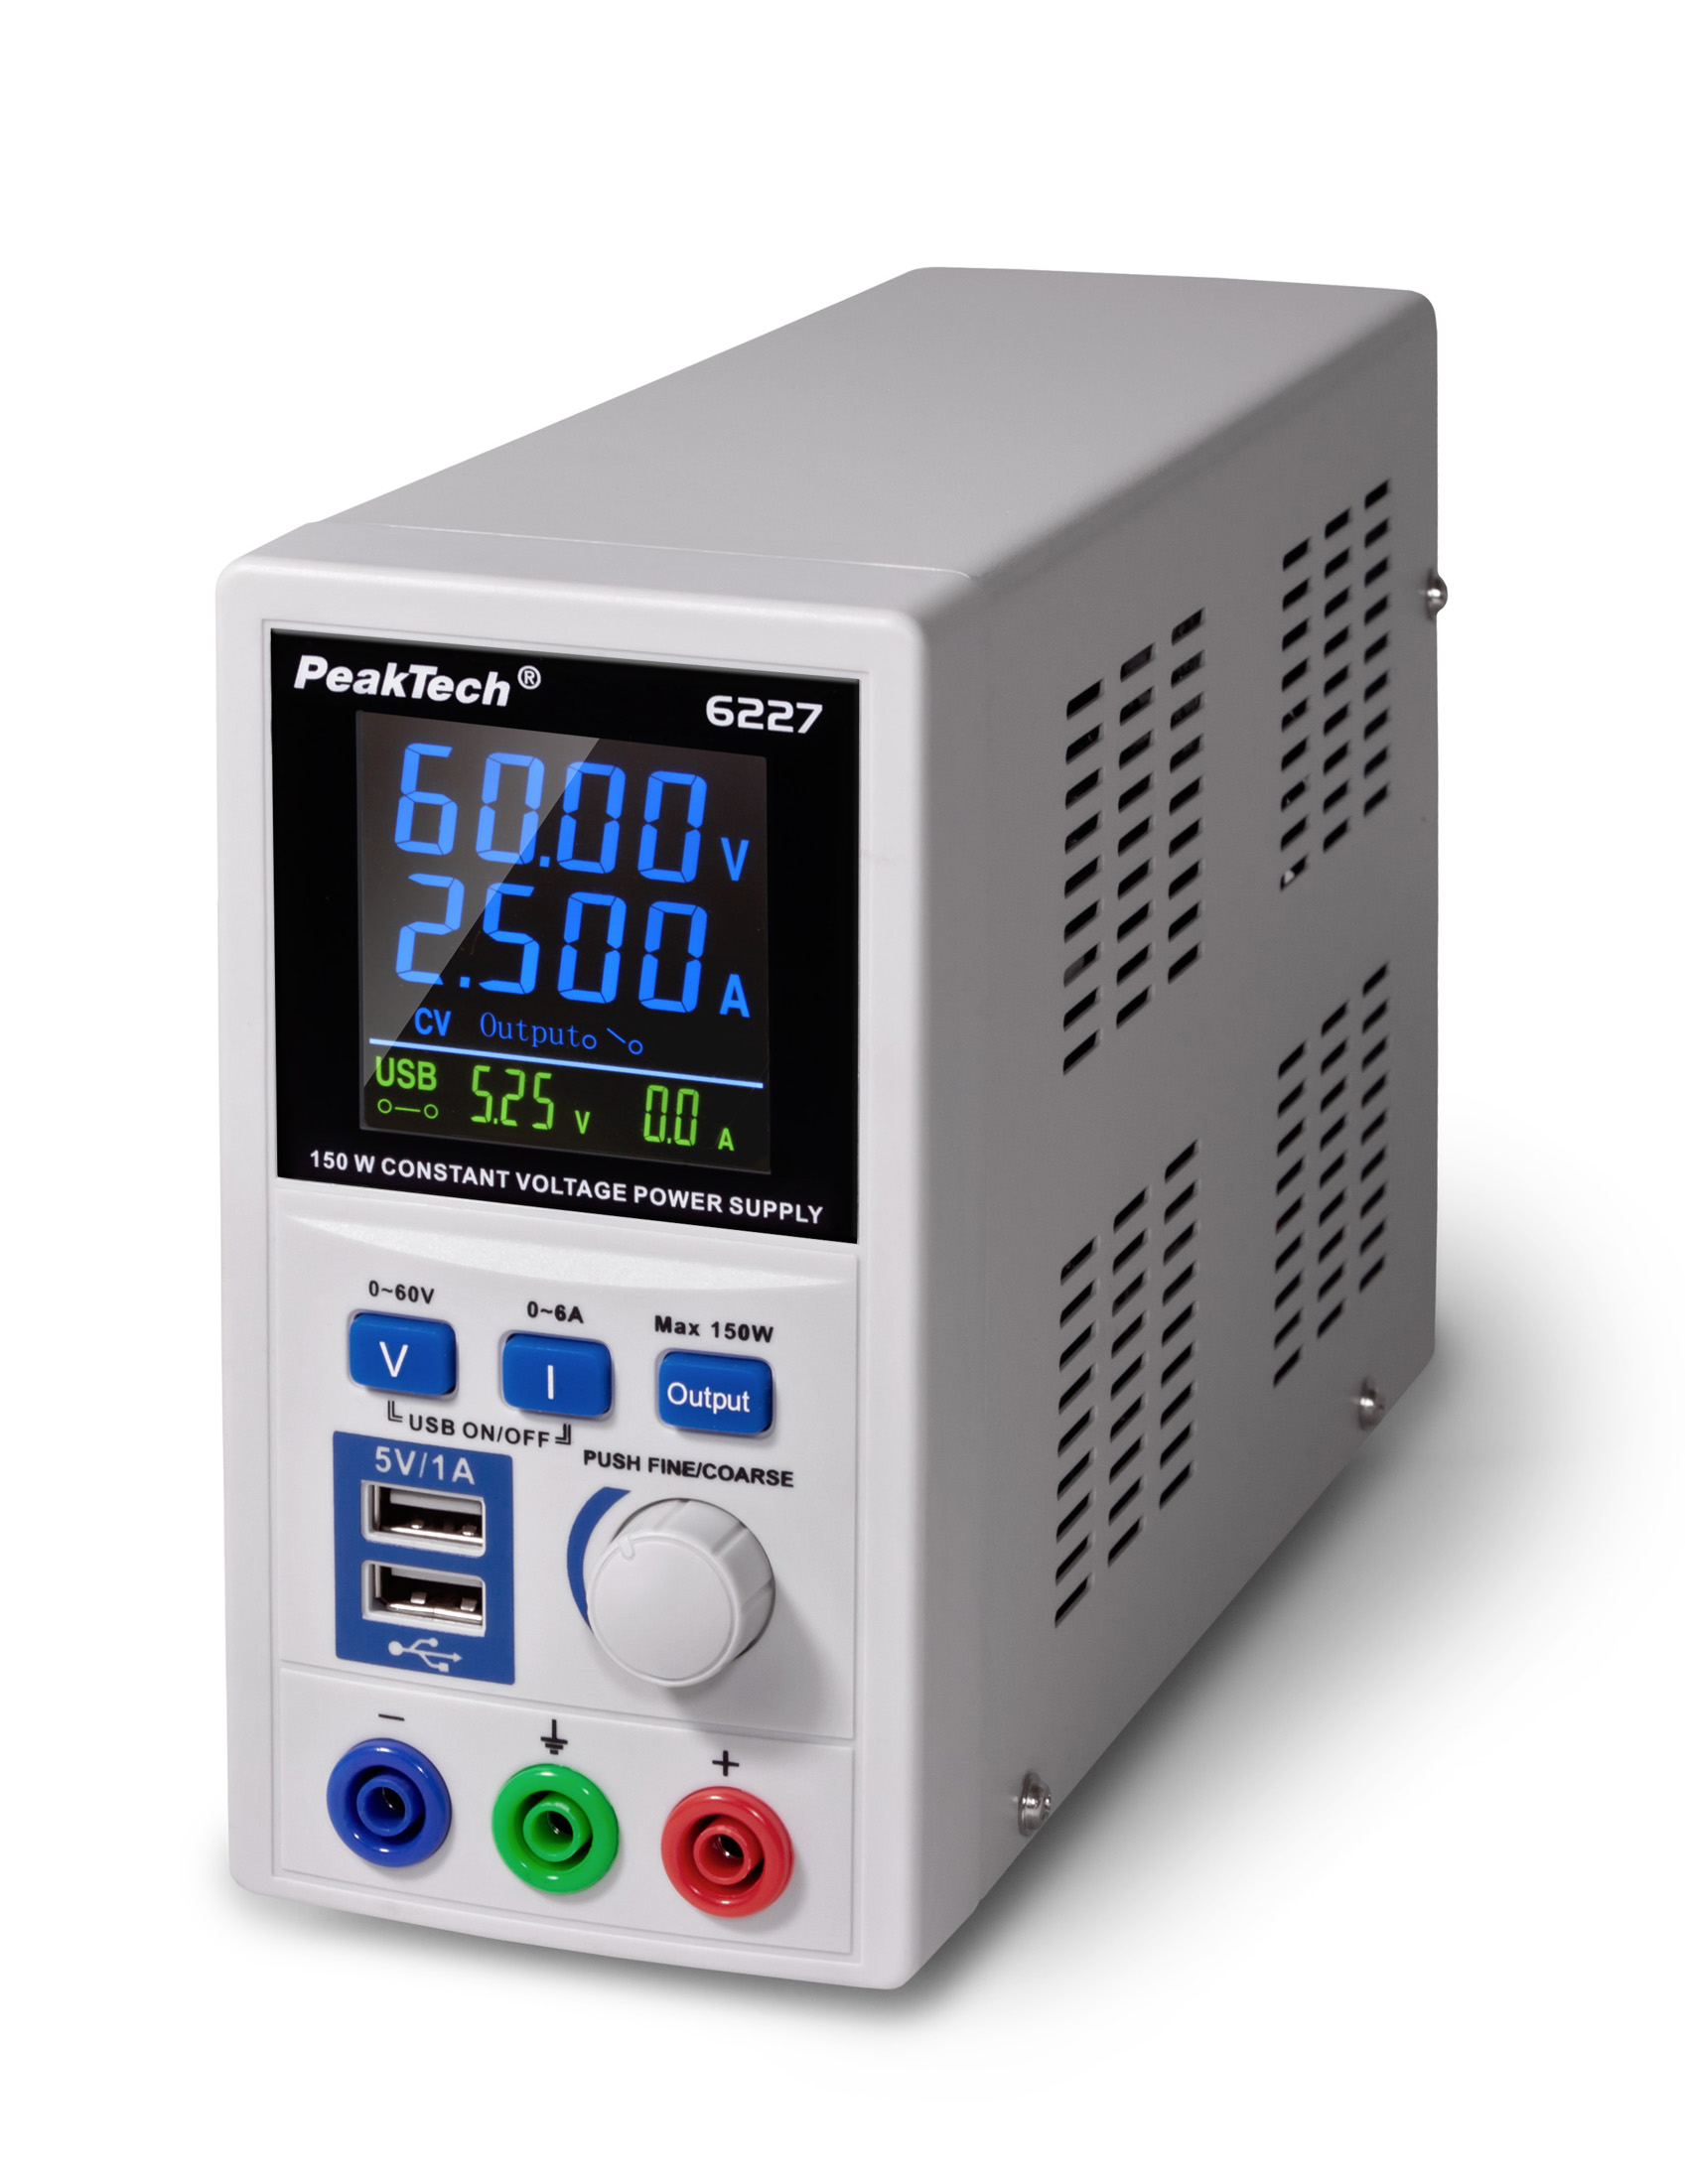 «PeakTech® P 6227» DC power supply 0-60 V / 0-6 A with 2 x USB